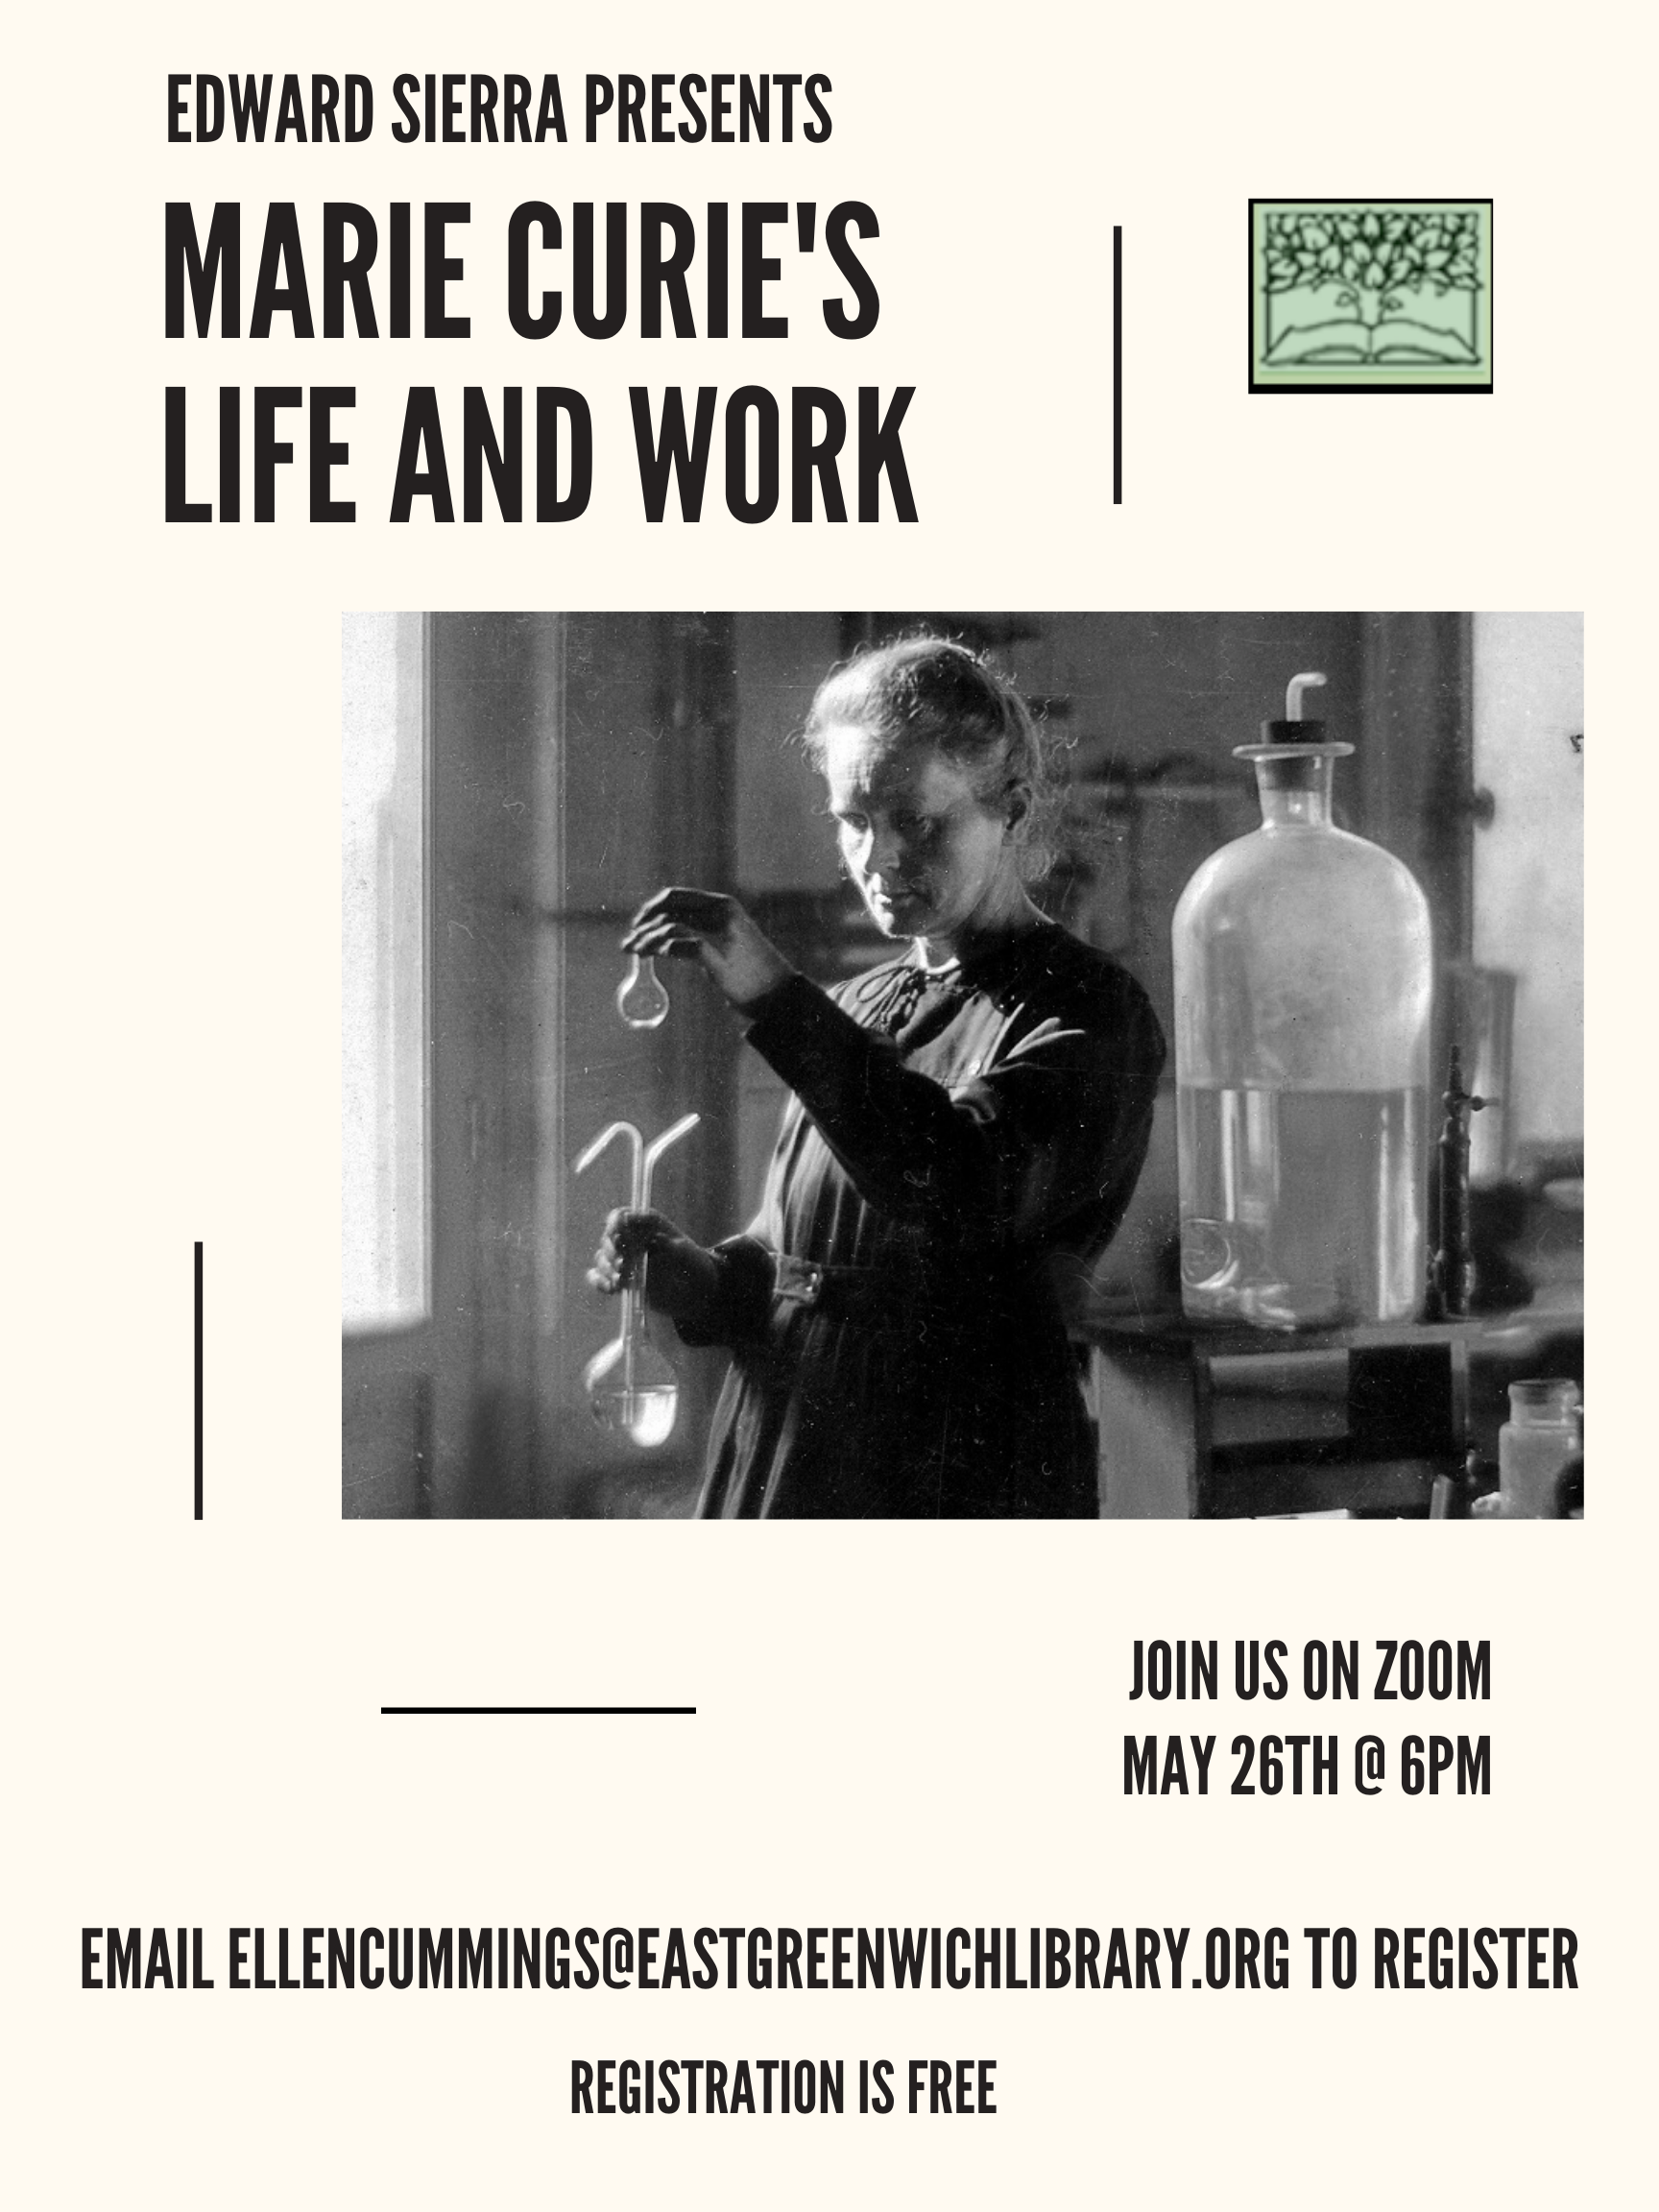 Marie Curie's Life and Work